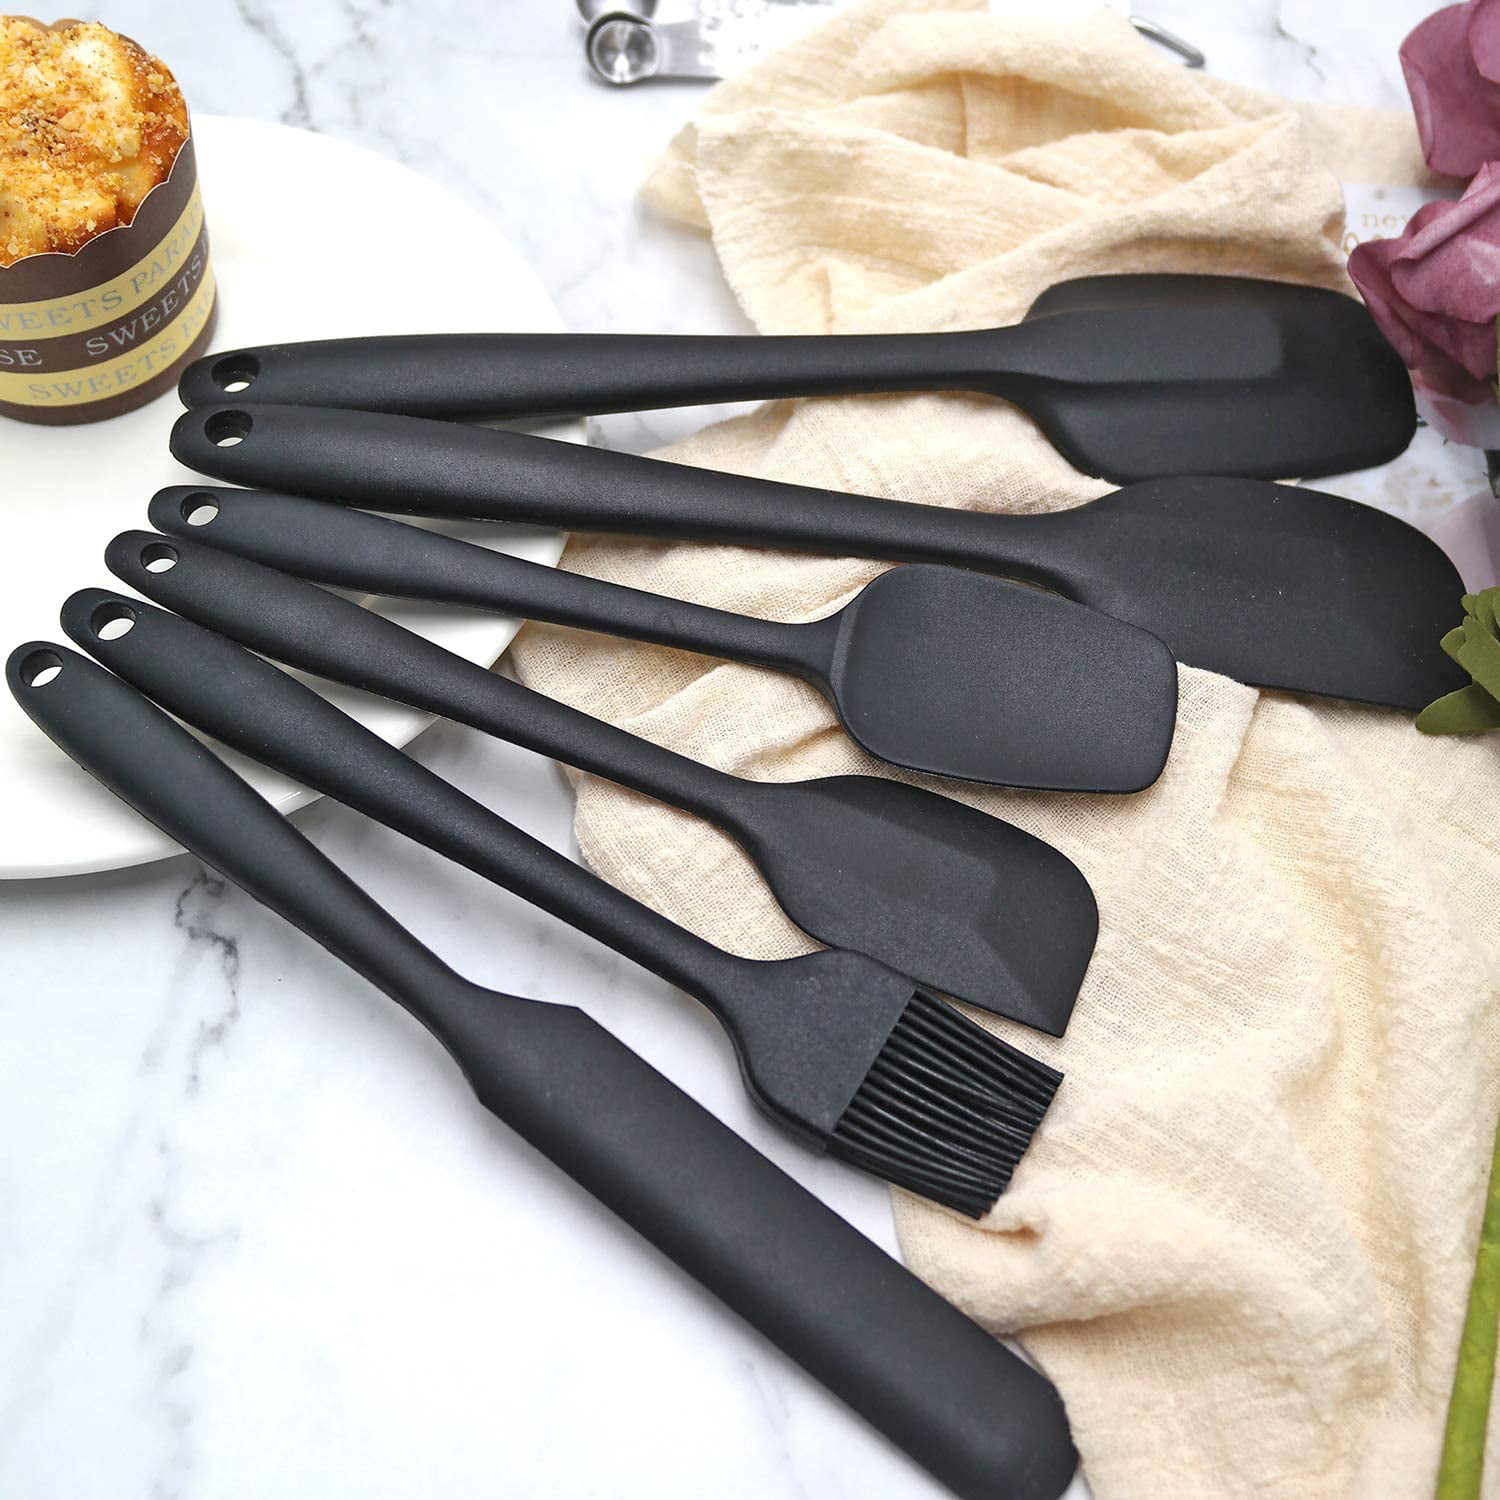 Silicone Spatula Set Non Stick Heat Resistant Rubber Spatula Spoon Kitchen  Baking Utensils Online With Stainless Steel Core Black Red From Jessie06,  $8.44